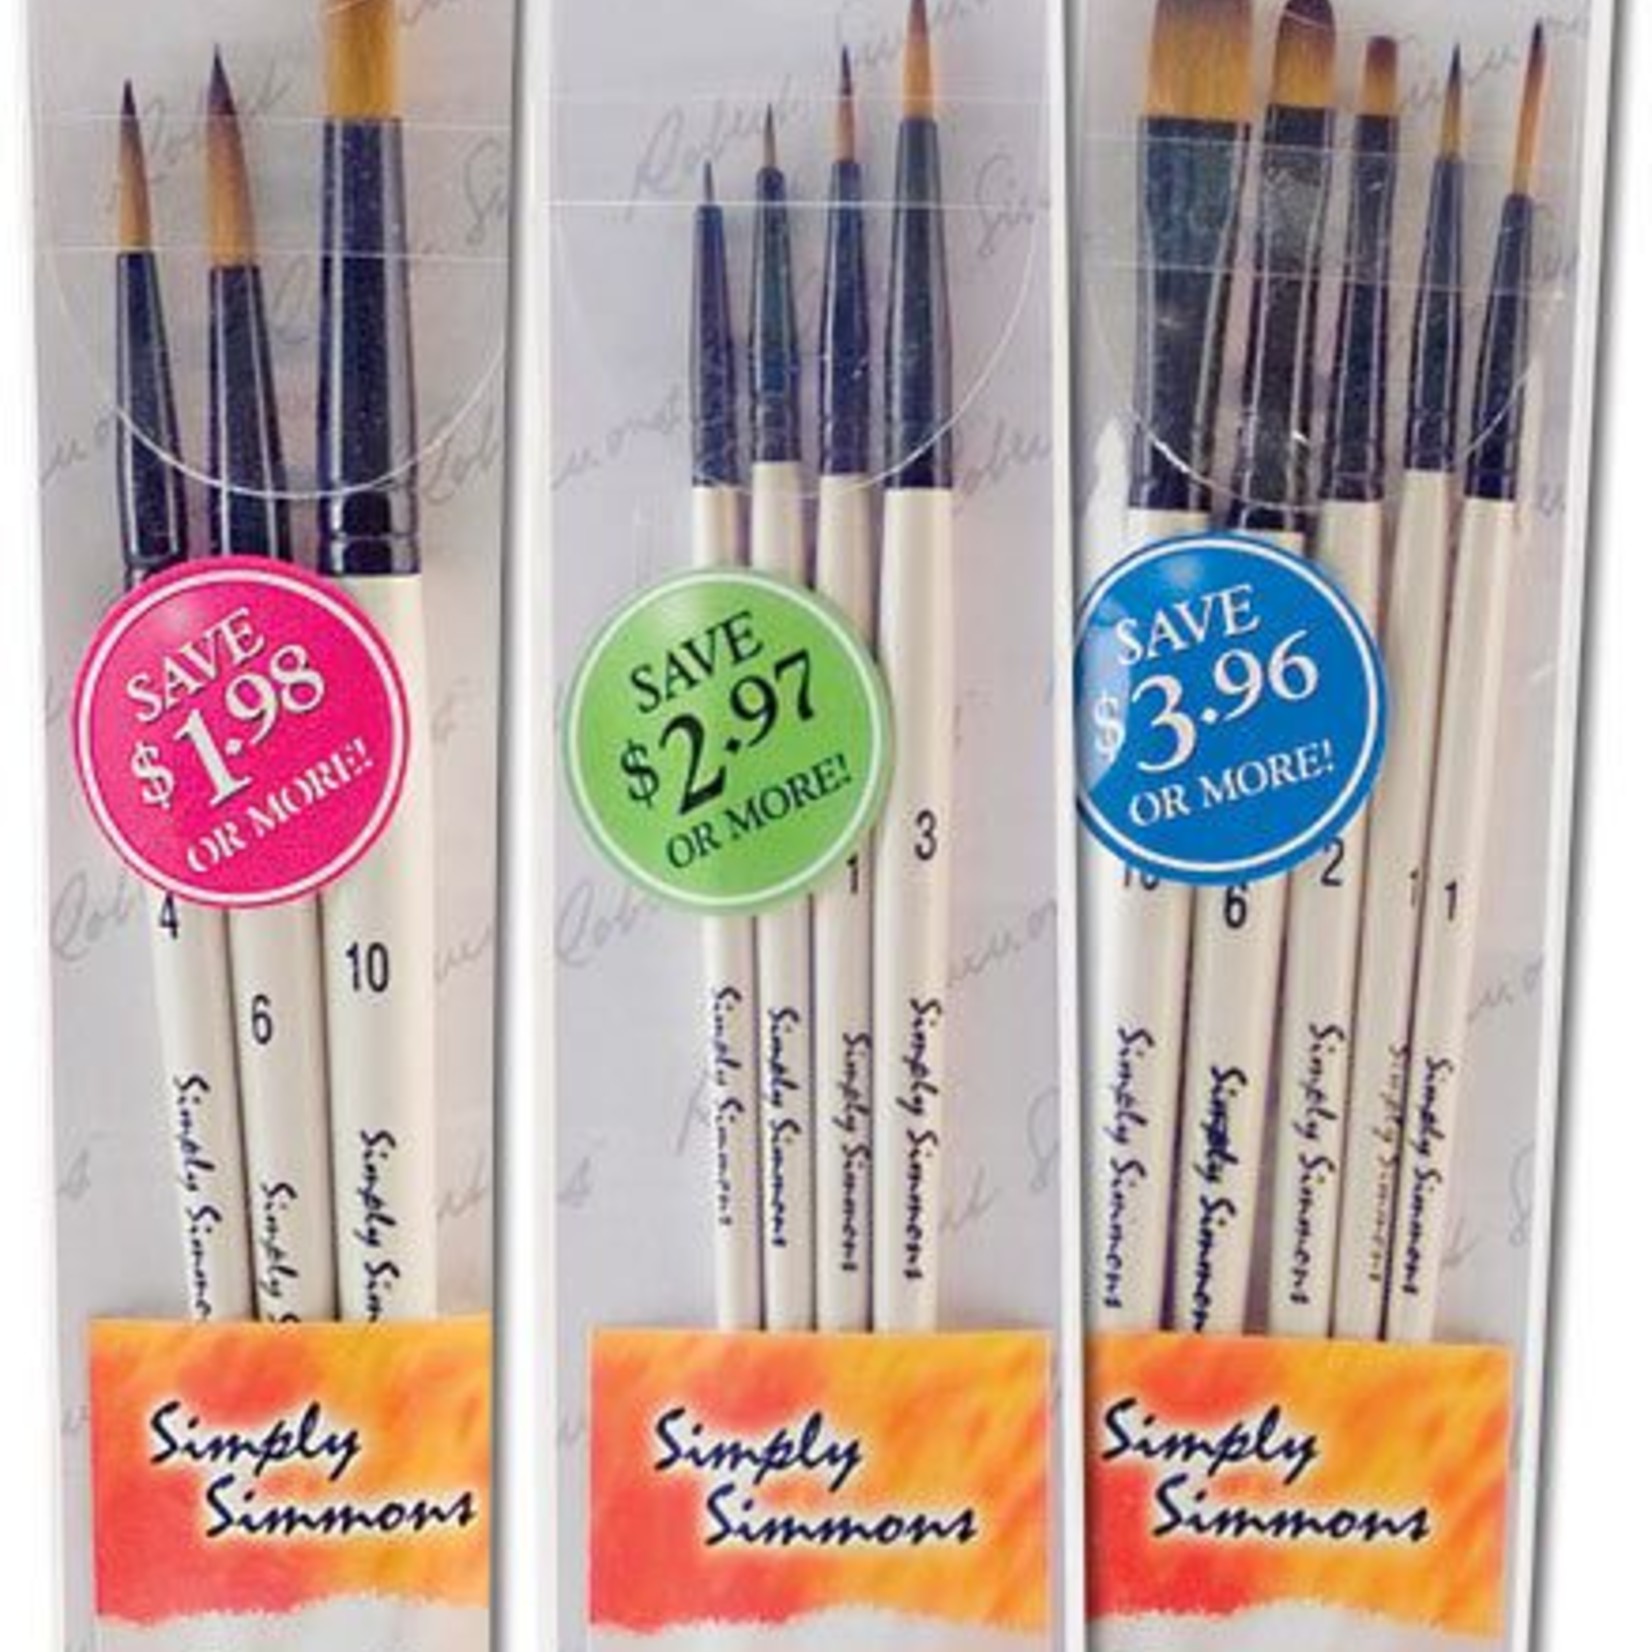 DALER ROWNEY SIMPLY SIMMONS VALUE BRUSH SET/4 LONG HANDLE SYNTHETIC